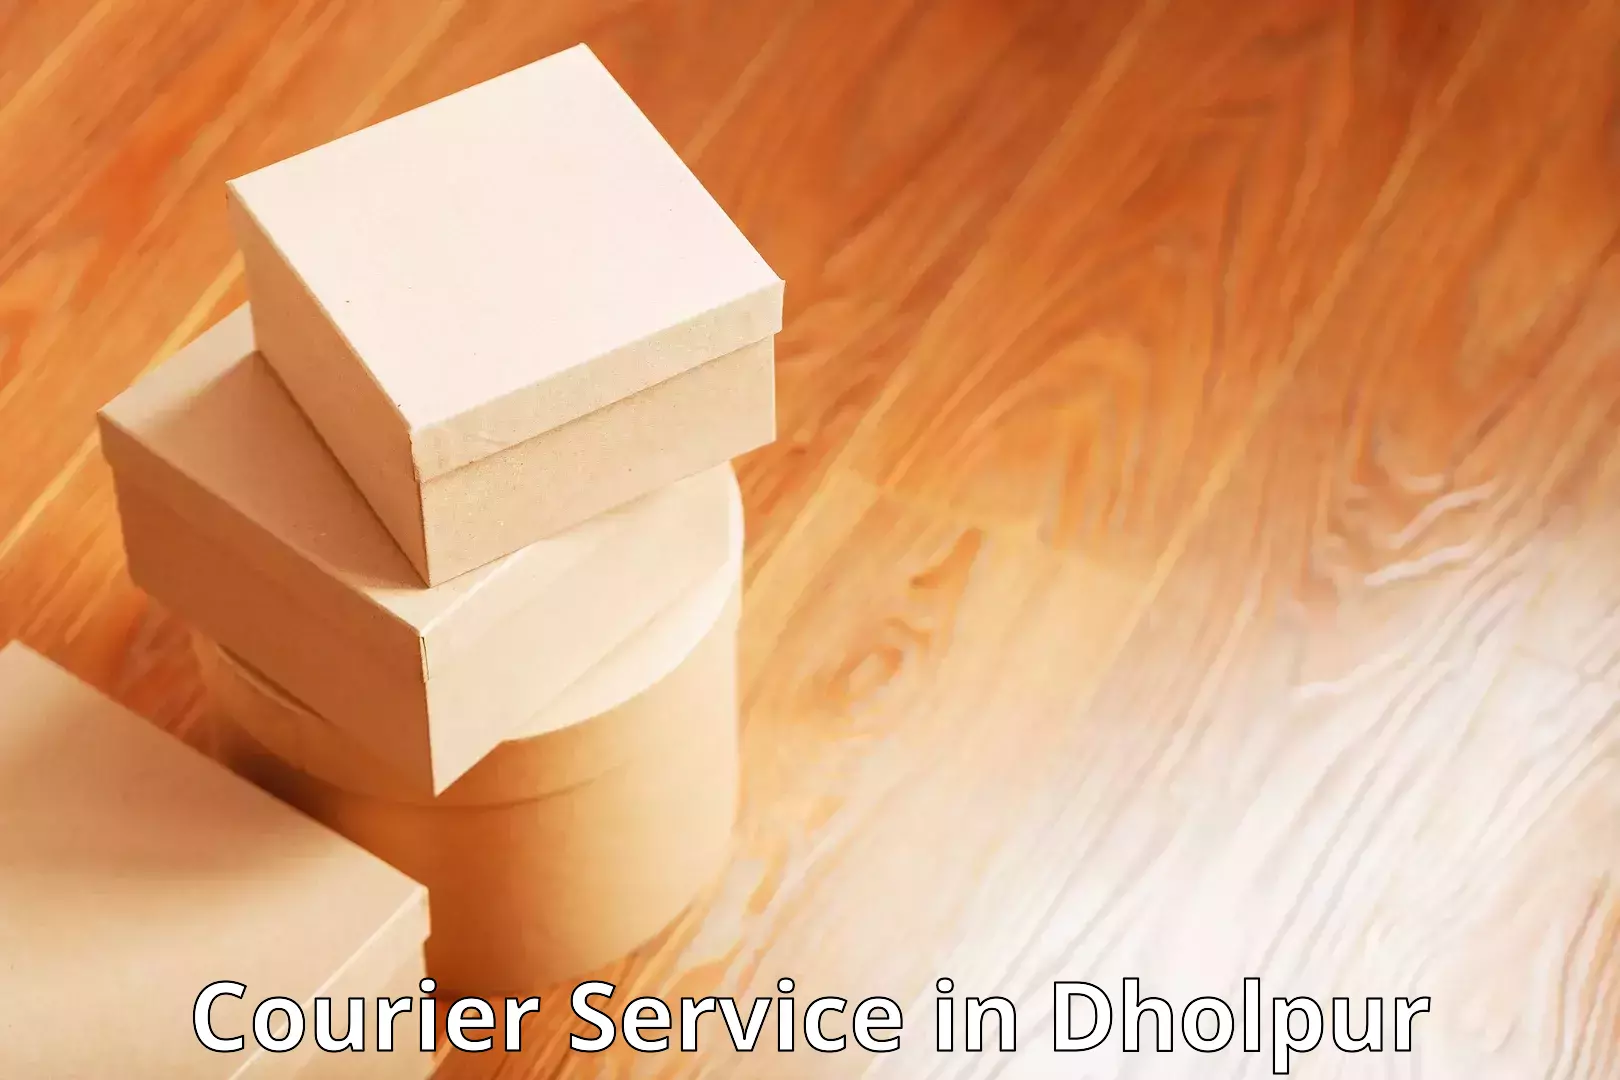 Speedy delivery service in Dholpur